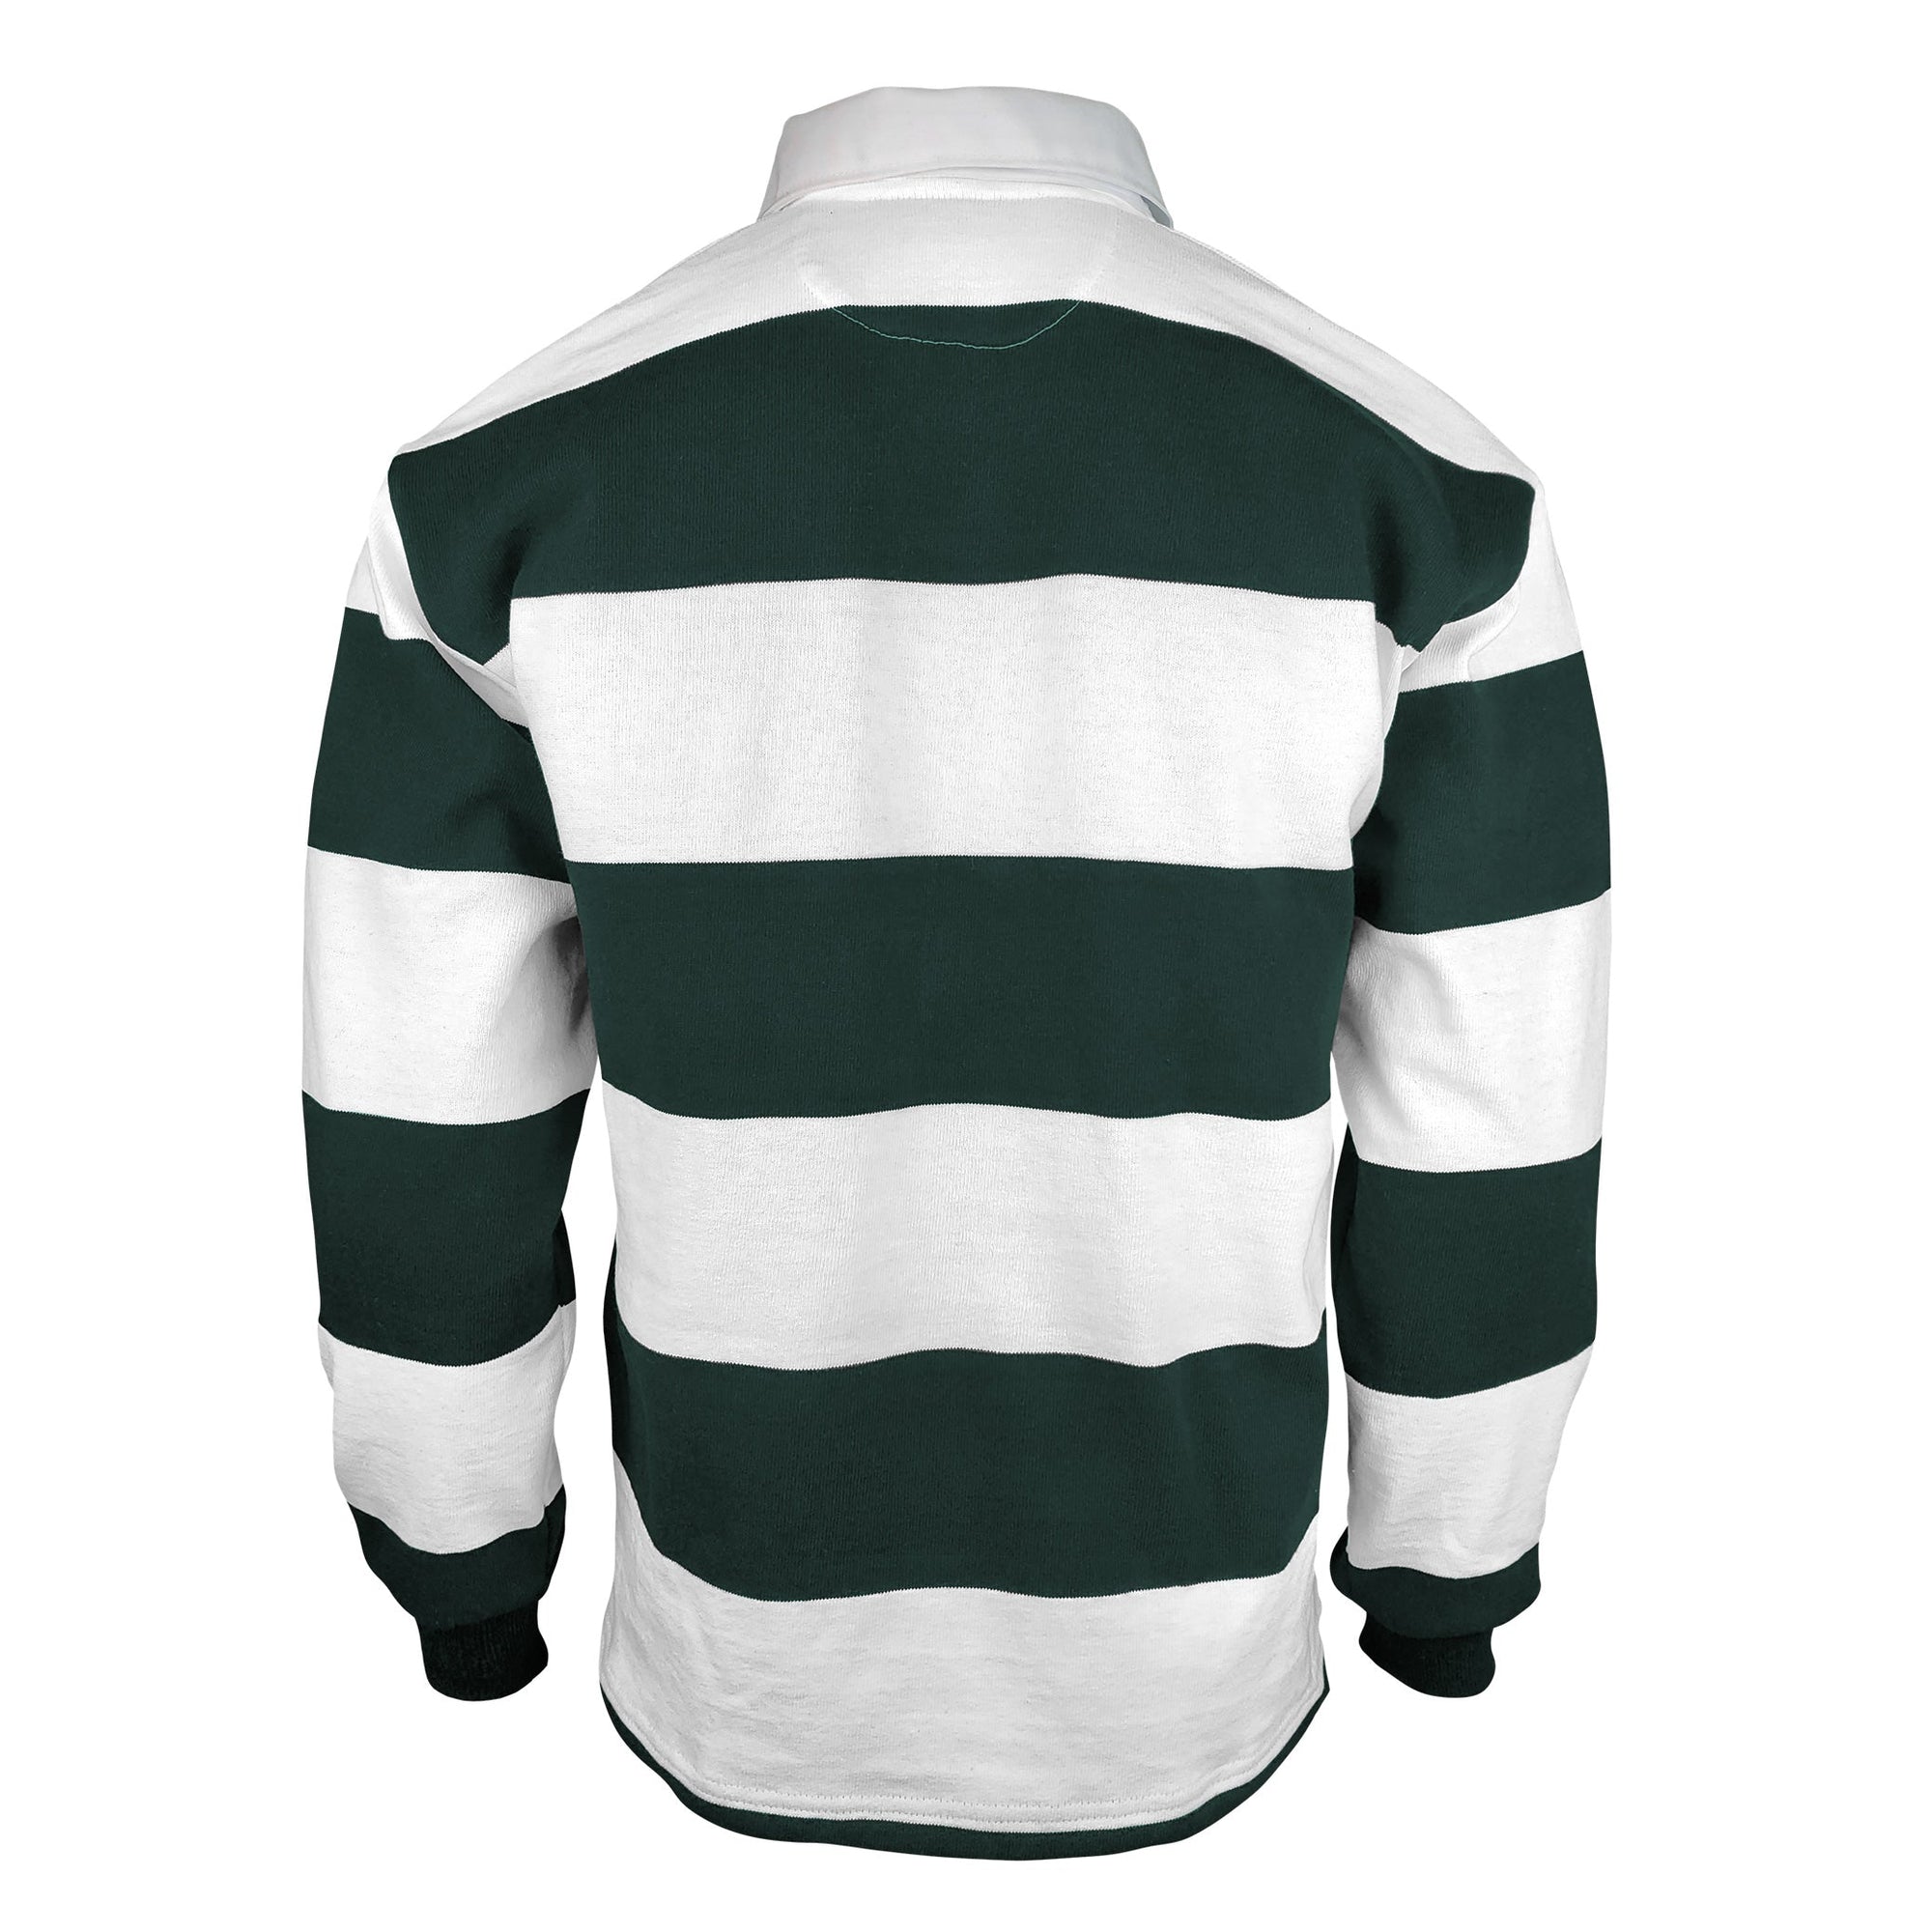 Rugby Imports Plymouth State WRFC Casual Weight Stripe Jersey